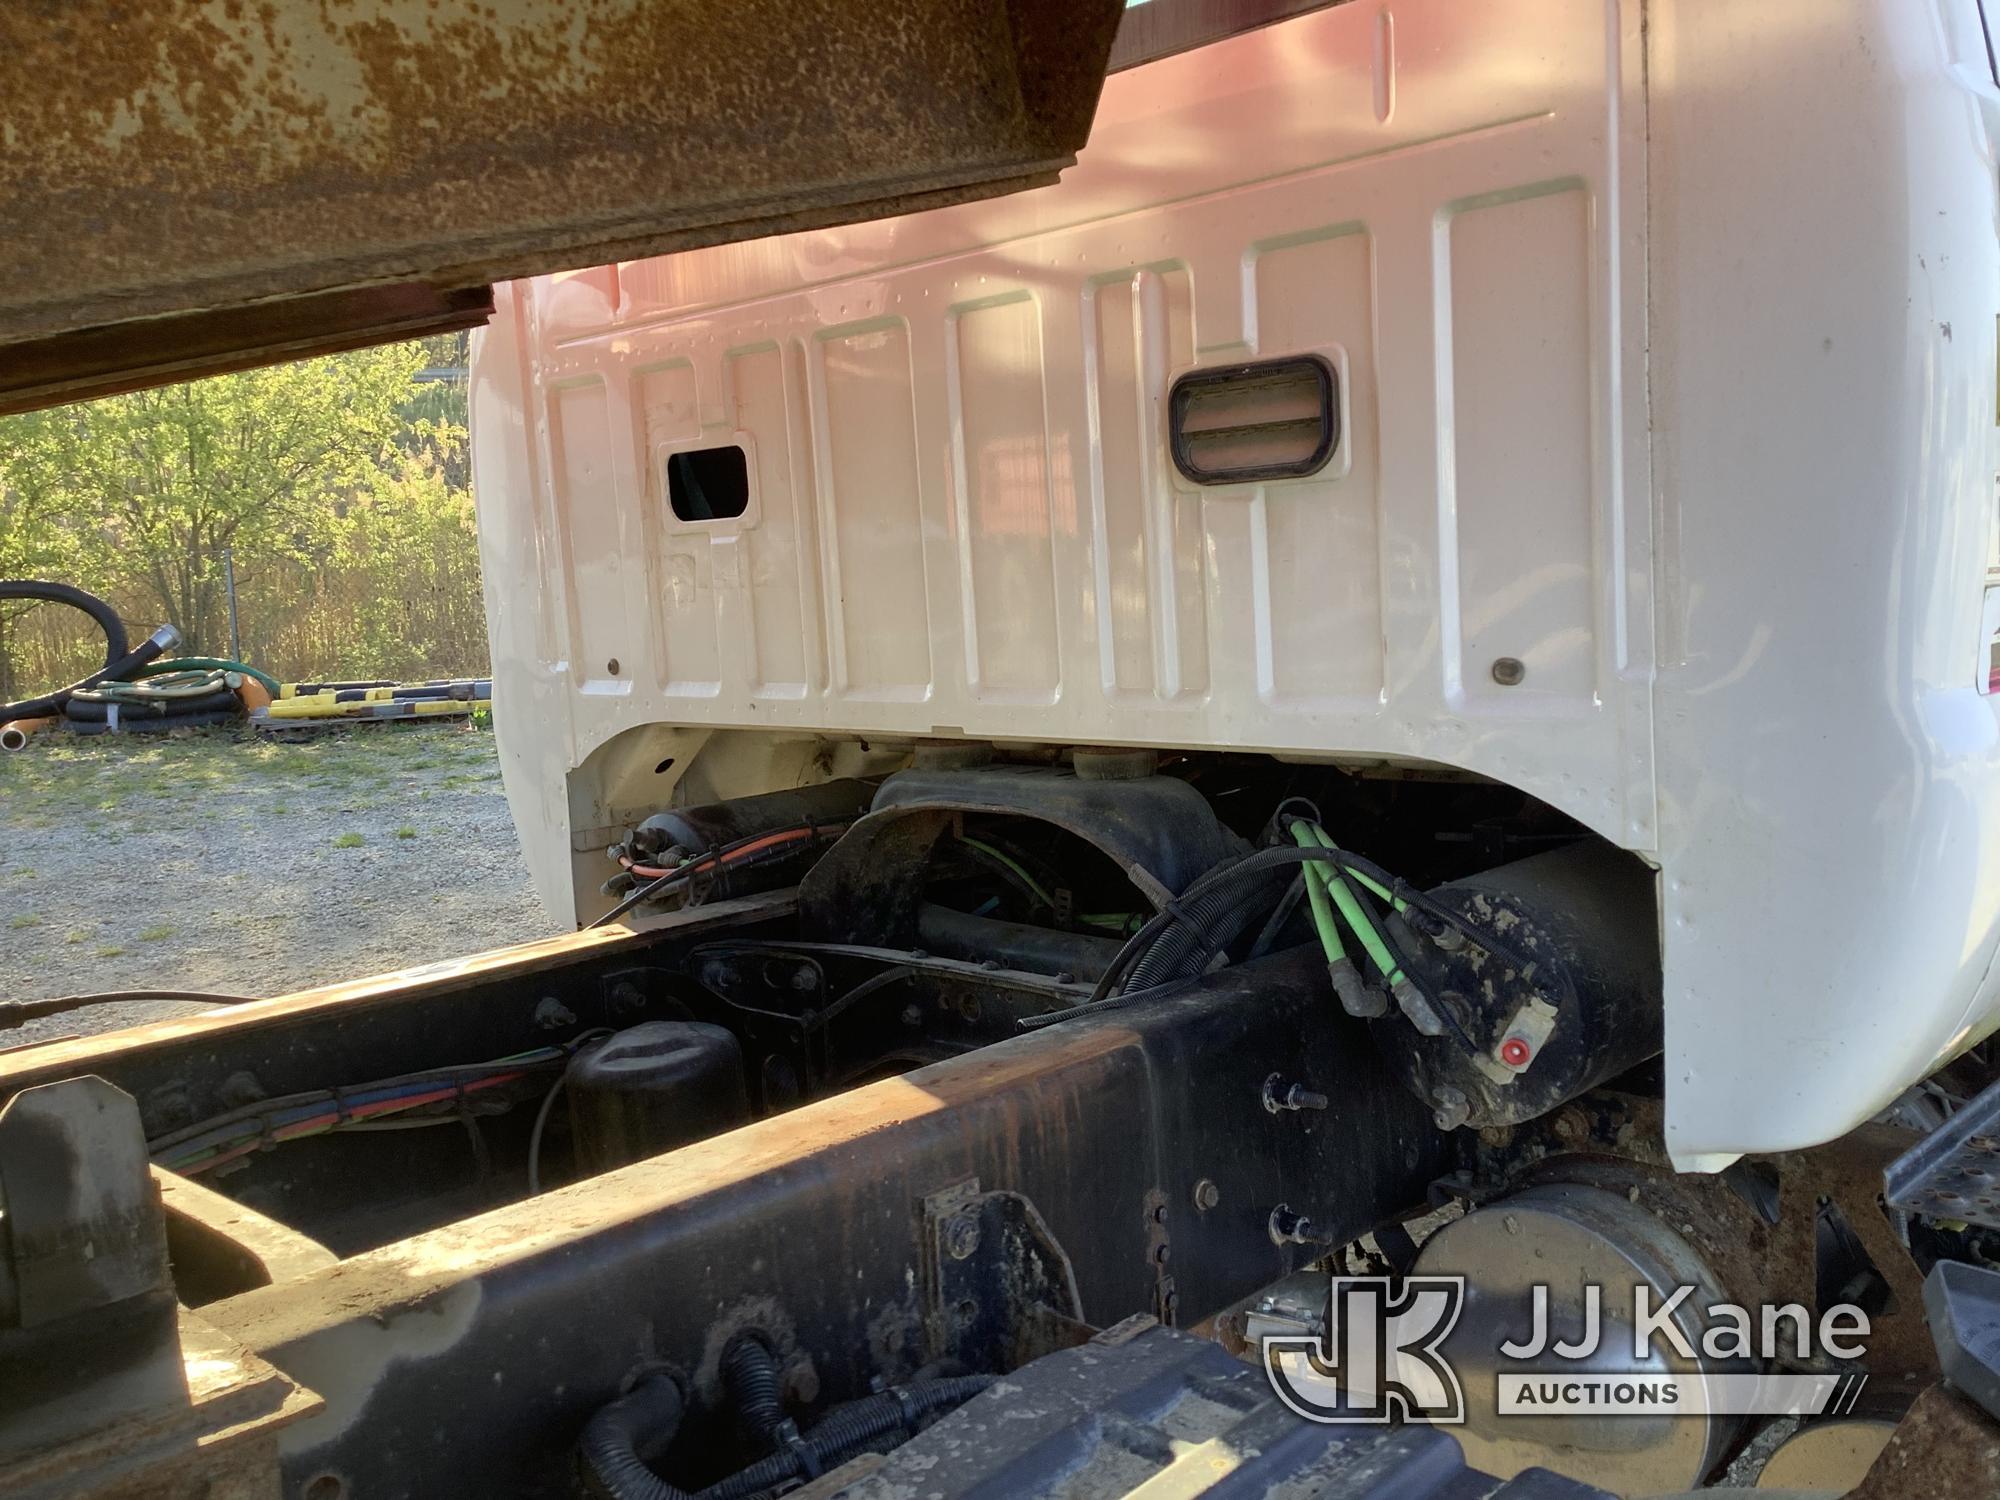 (Houston, PA) 2013 Ford F750 Dump Truck Runs, Moves & Operates) (Check Engine Light On, Rust & Body